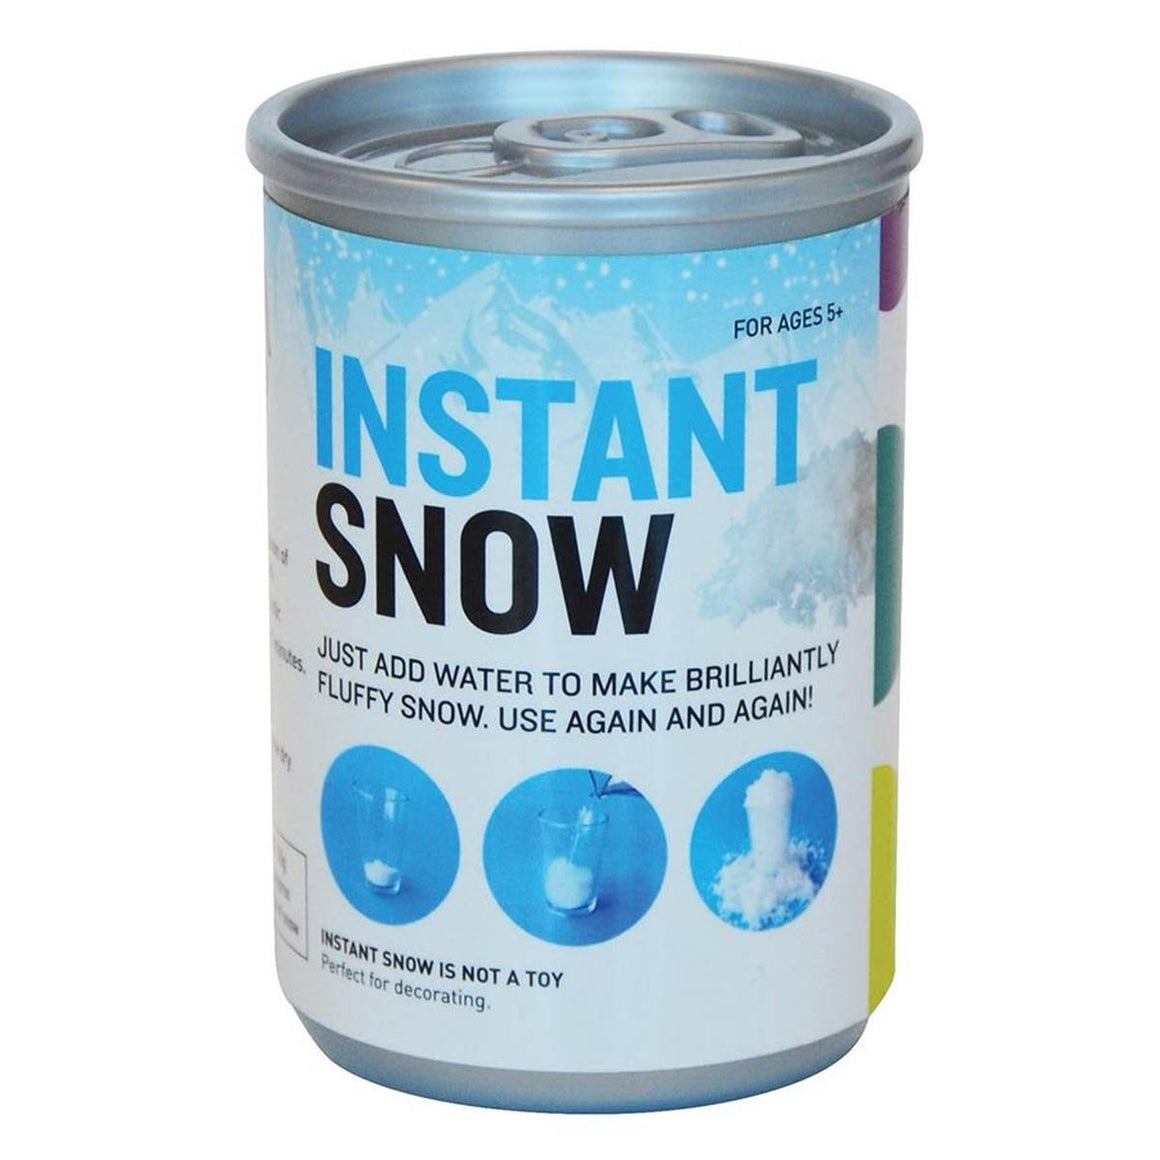 Packaging featuring images of snow, including images of instructions on how to make instant snow